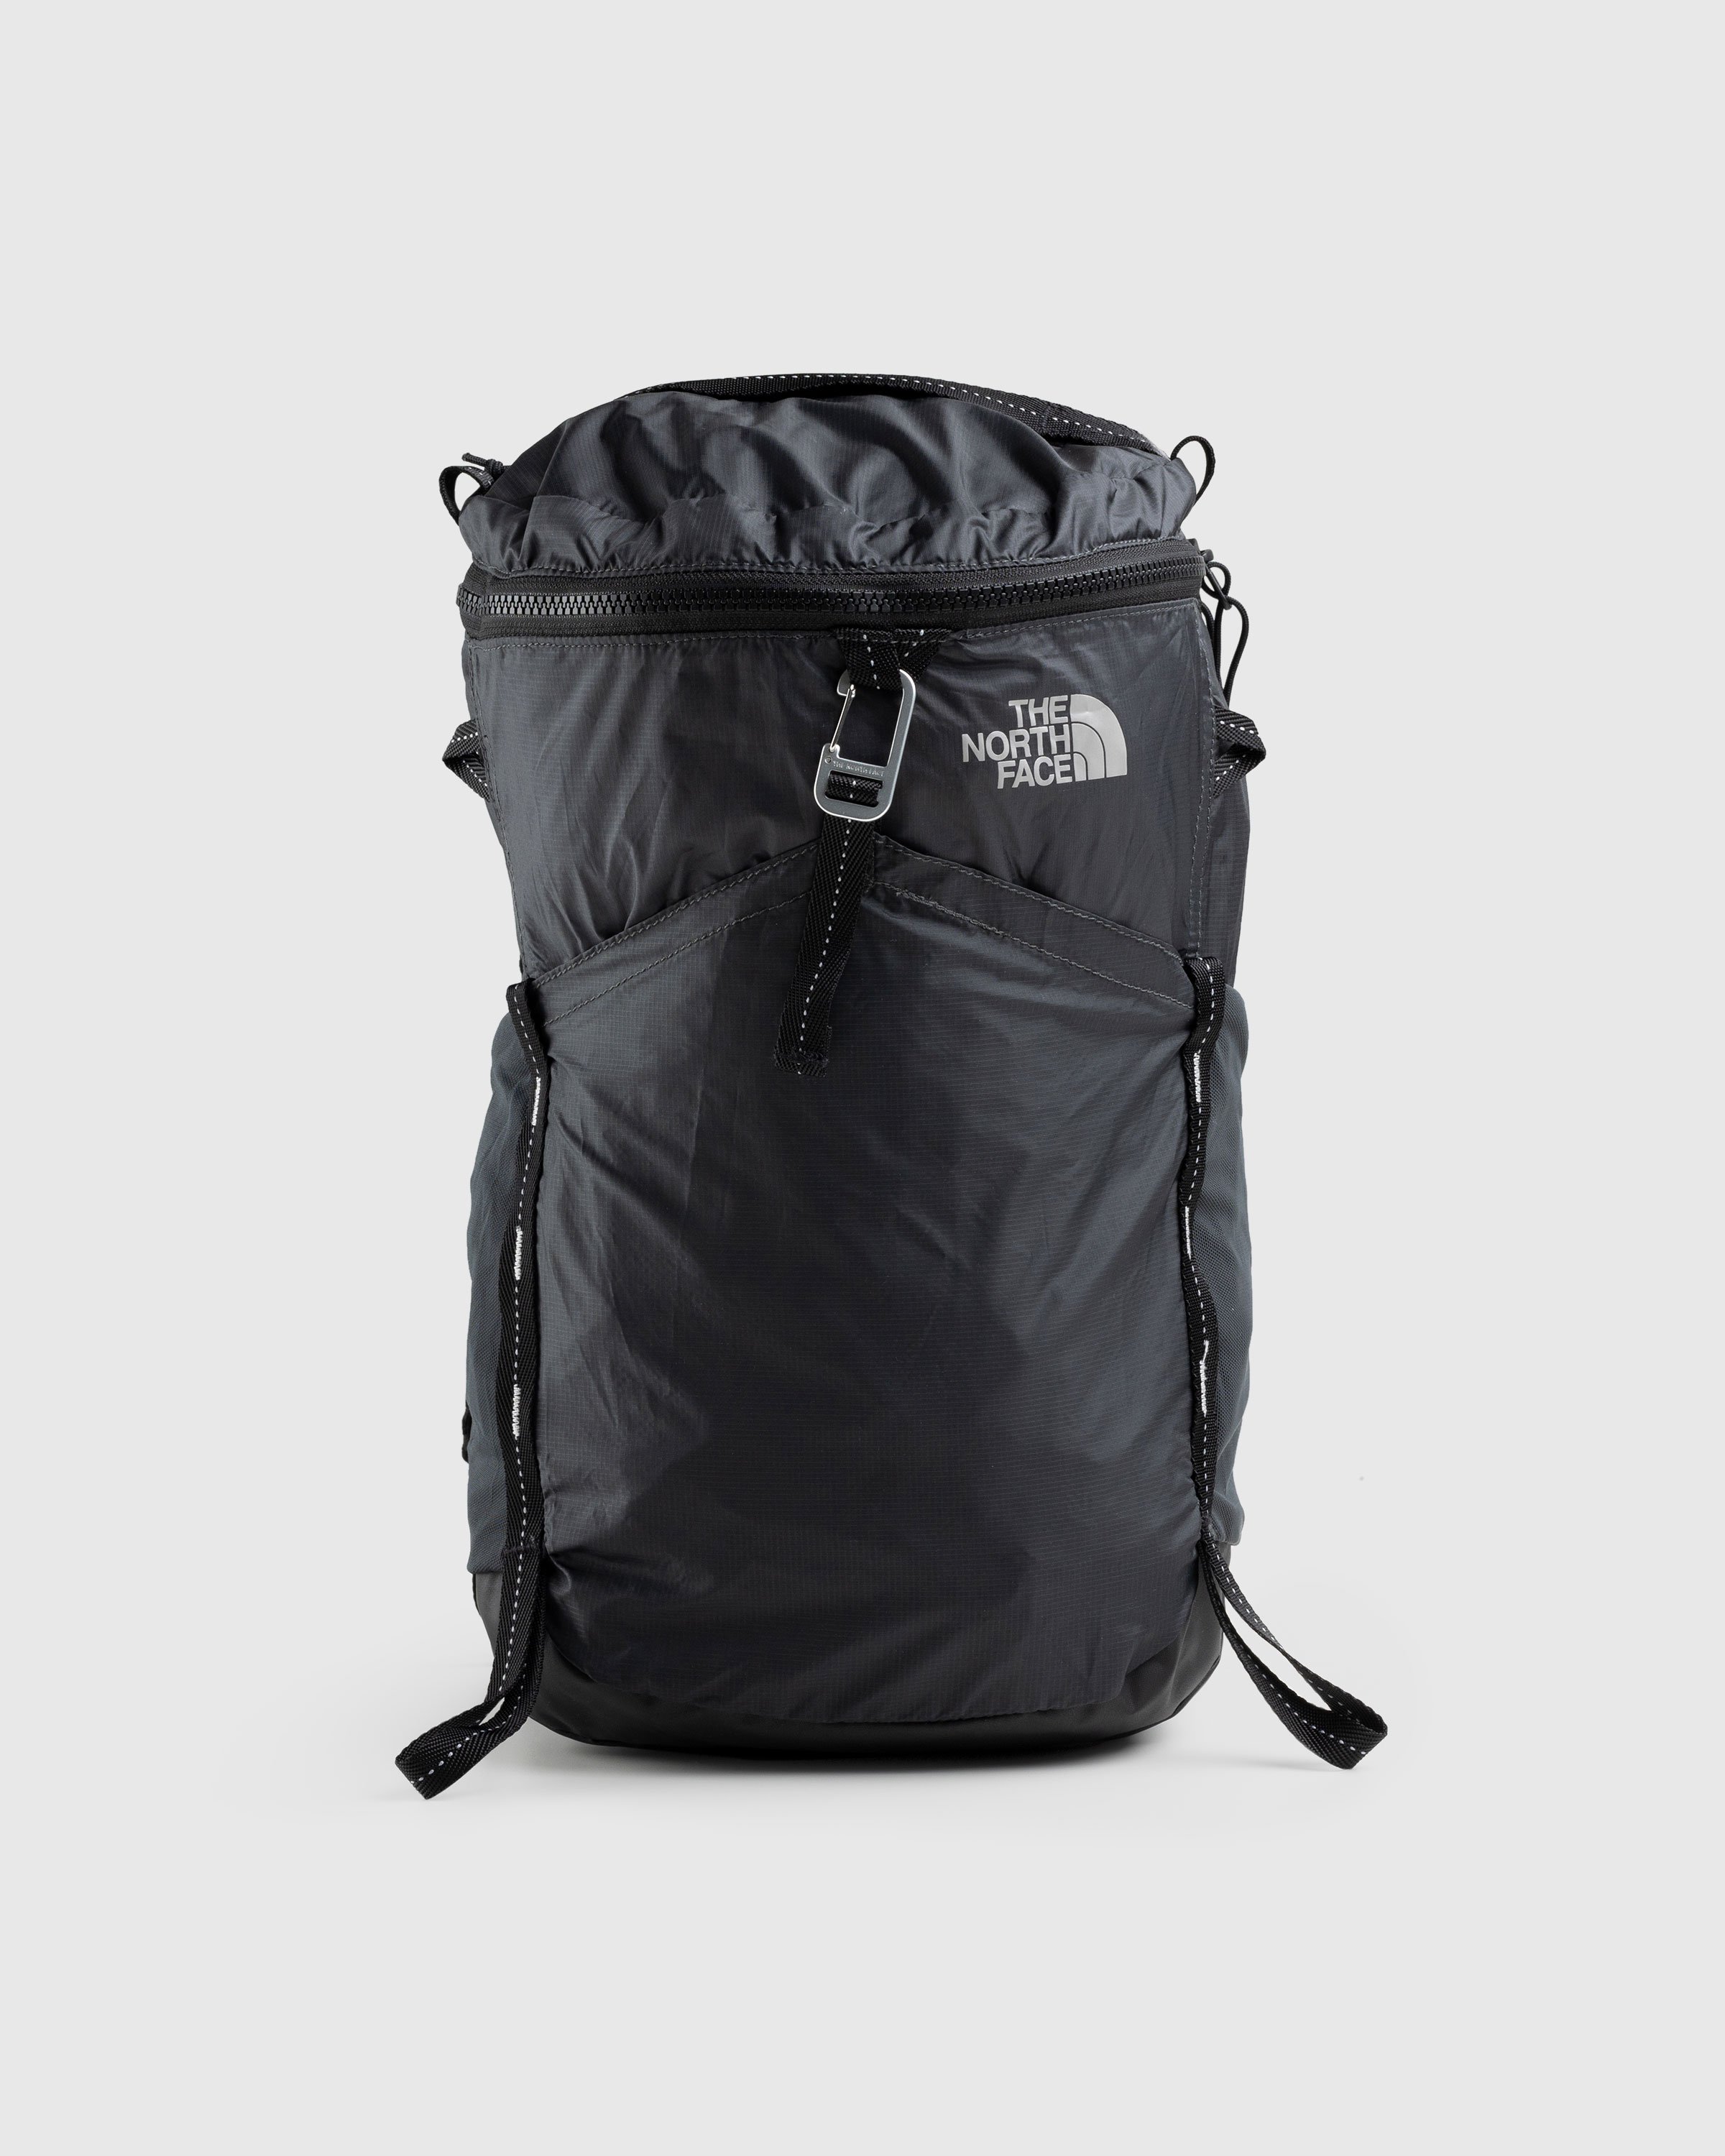 The North Face - Flyweight Daypack Asphalt Grey/TNF Black - Accessories - Grey - Image 1